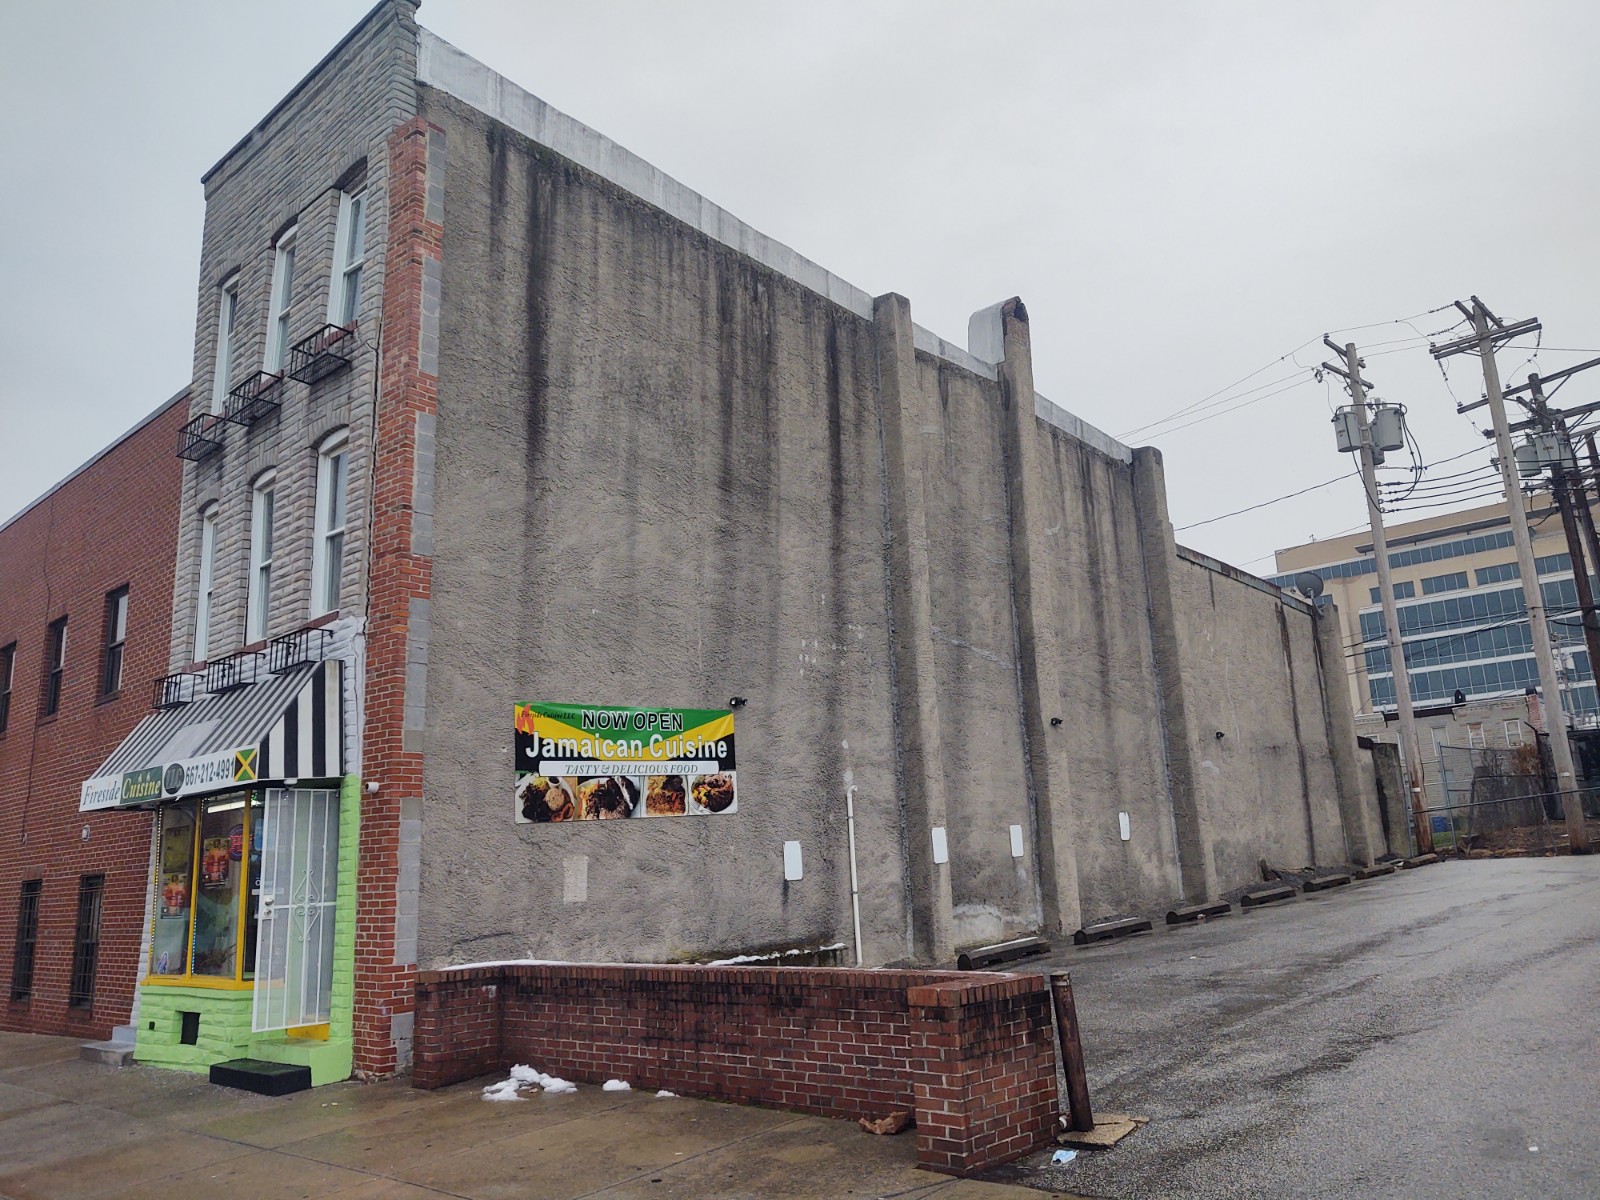 628 North Chester Street: Single Tenant Commercial Investment Building, Two Blocks from Johns Hopkins Hospital